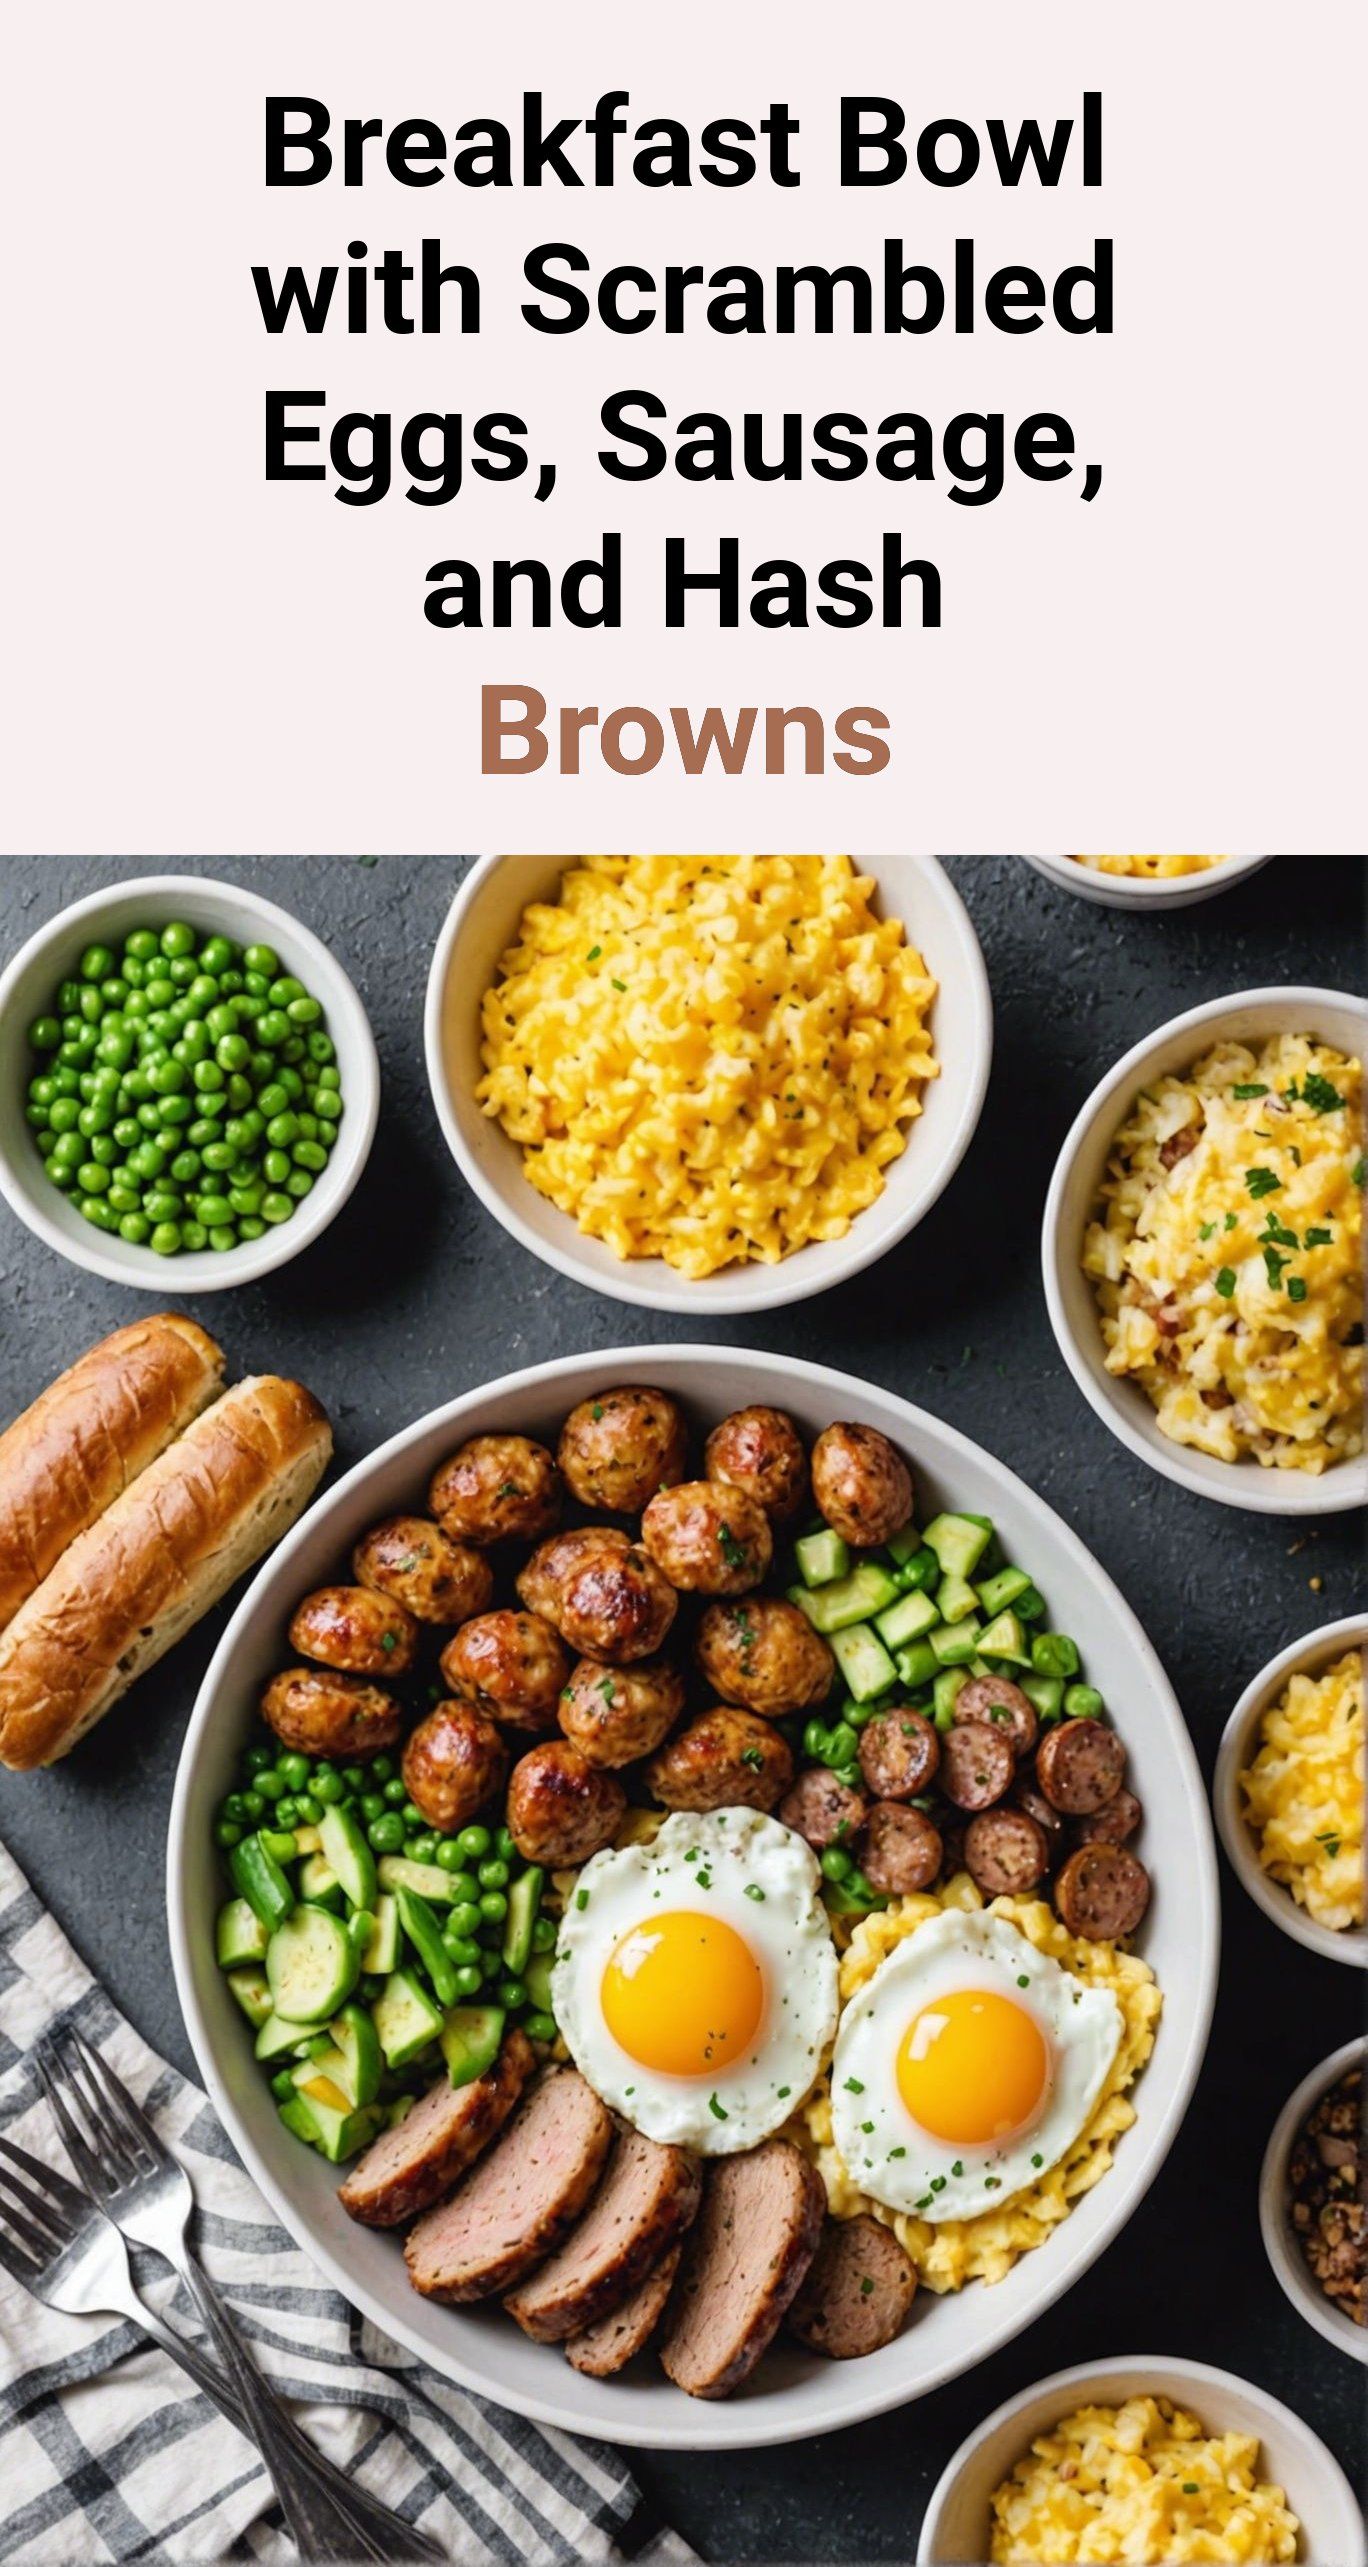 Breakfast Bowl with Scrambled Eggs, Sausage, and Hash Browns